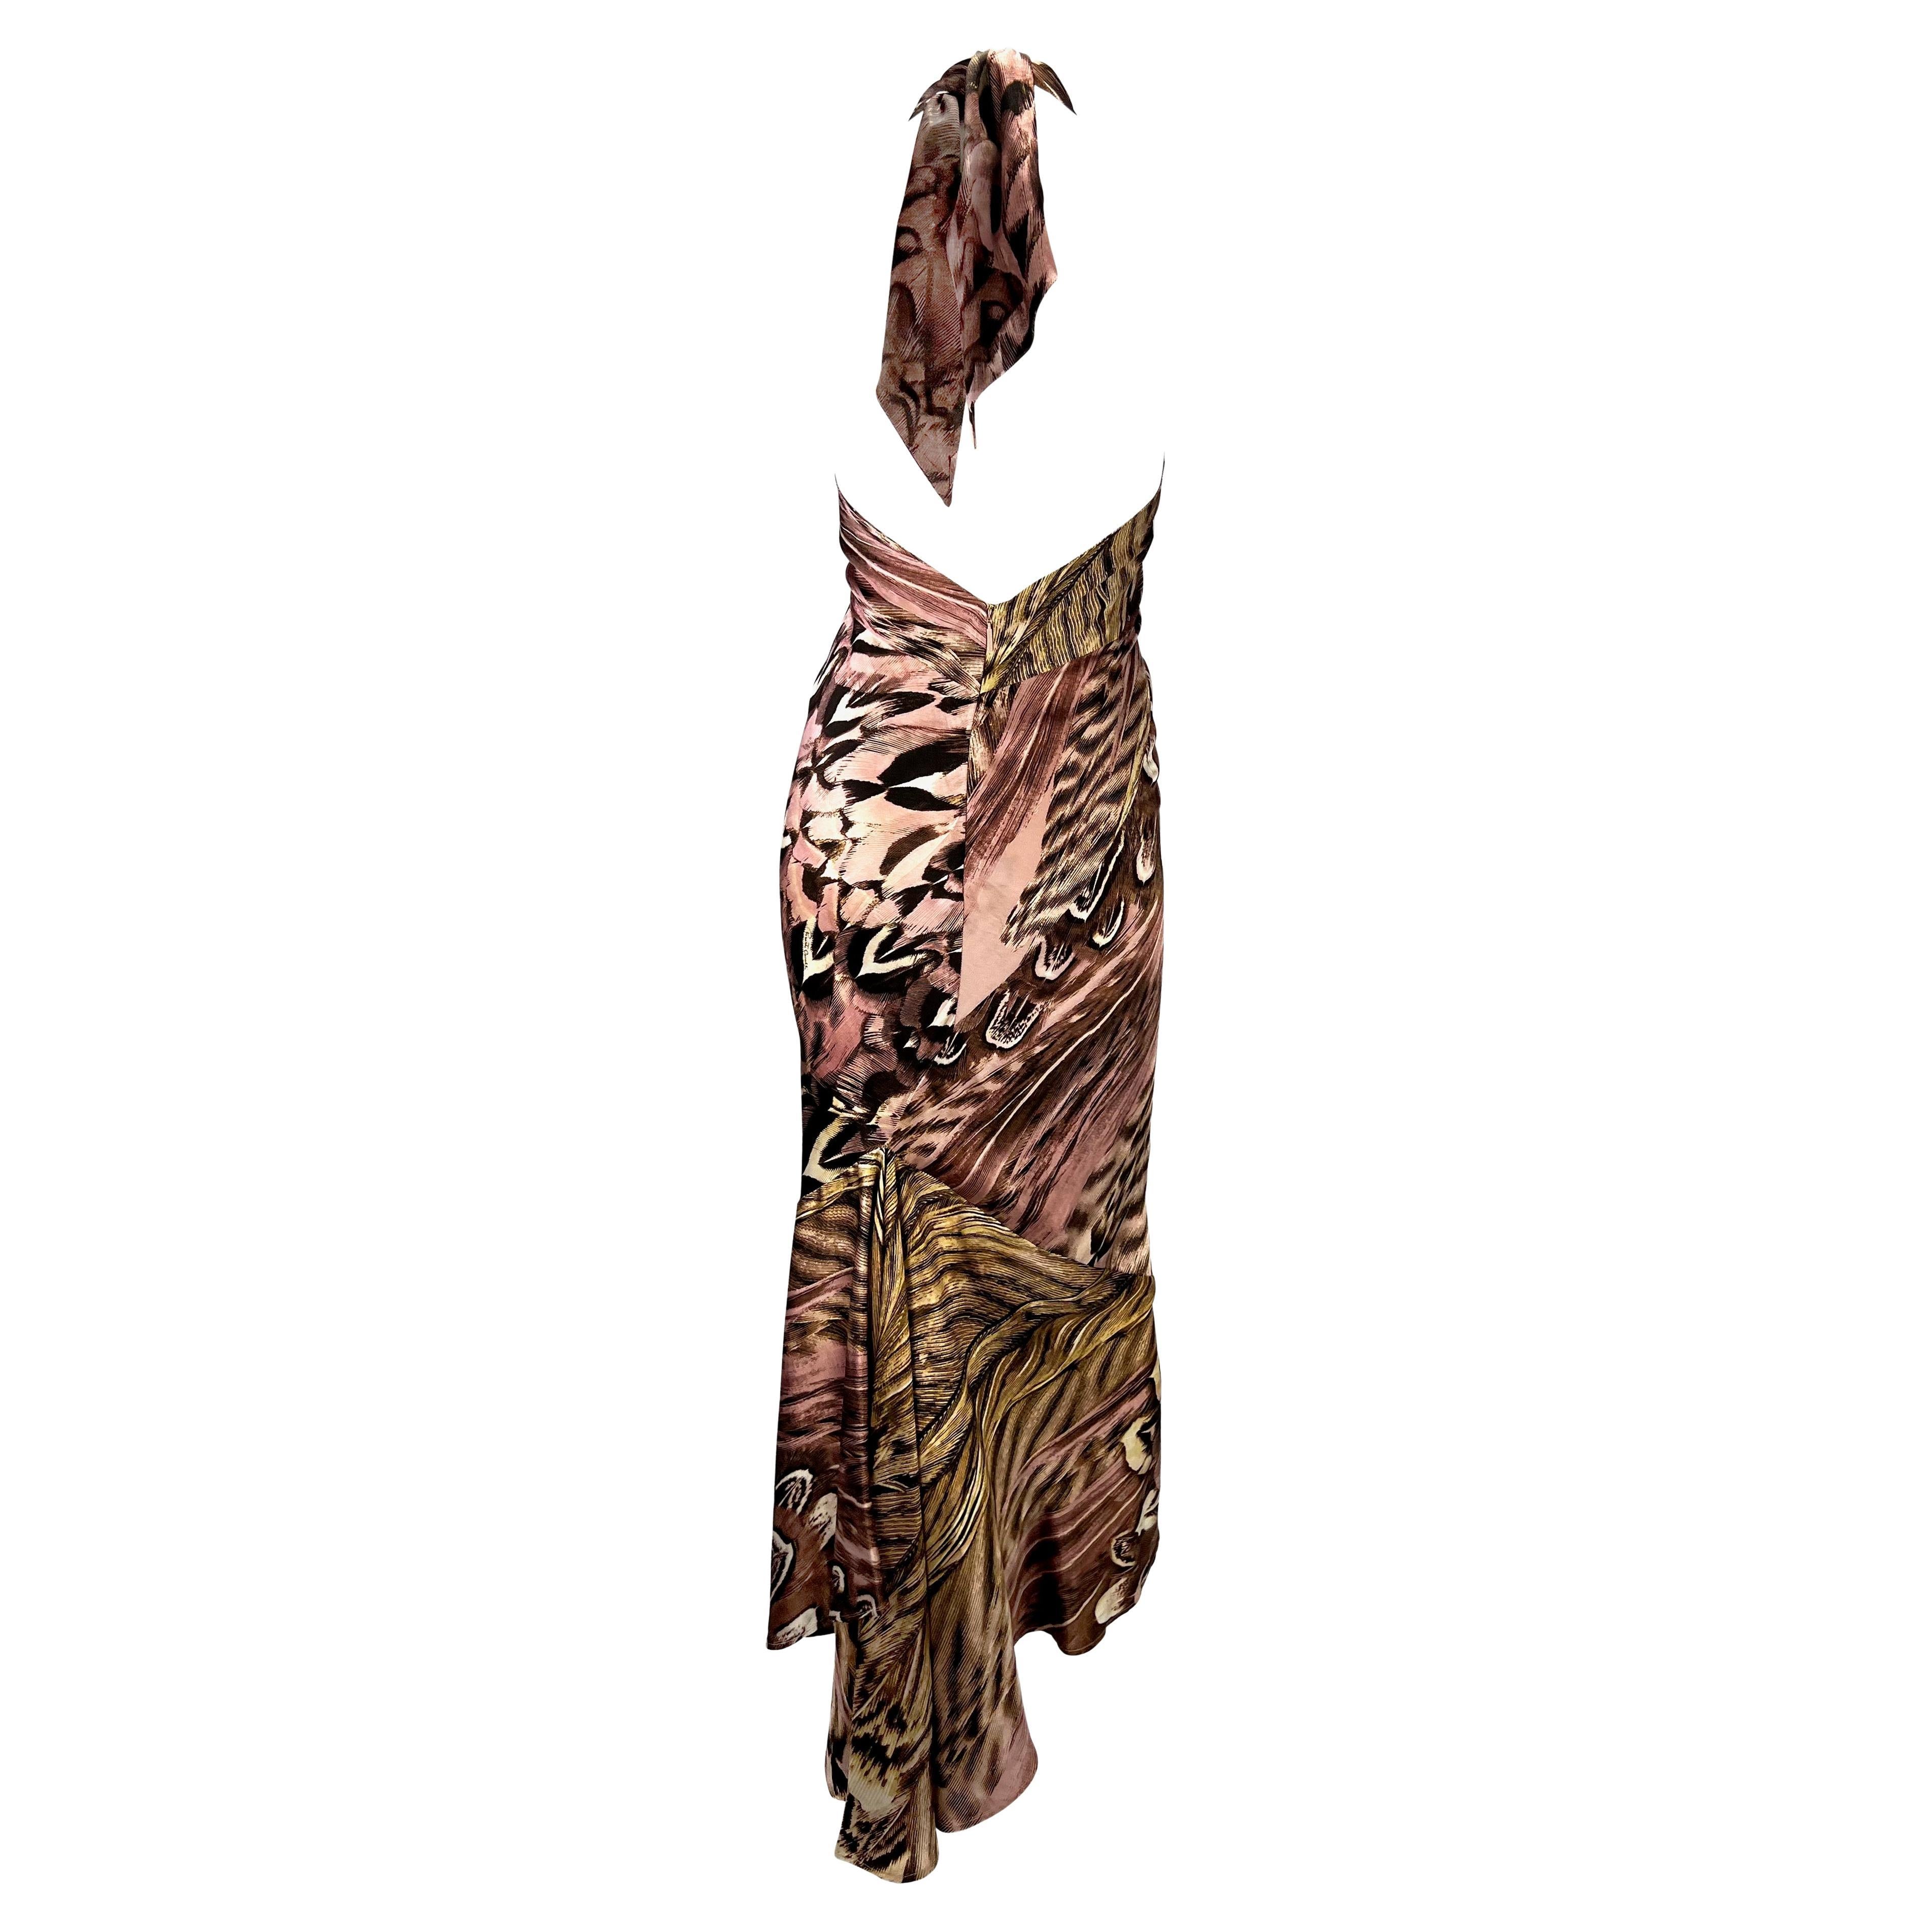 S/S 2005 Roberto Cavalli Silk Feather Print Halter Top Backless Gown In Excellent Condition For Sale In West Hollywood, CA